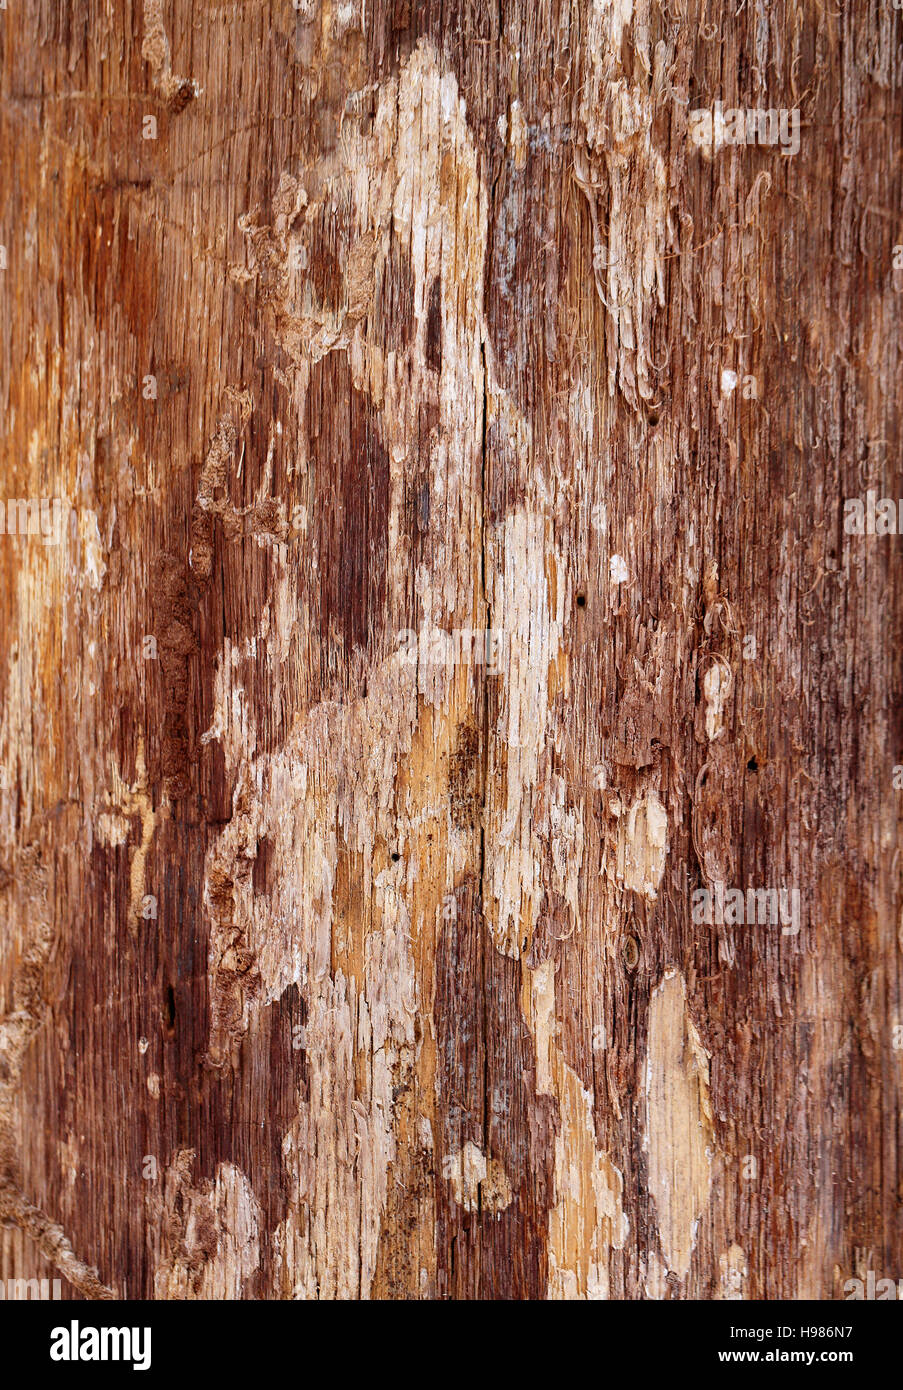 Beautiful wood texture pine photographed in close-up Stock Photo